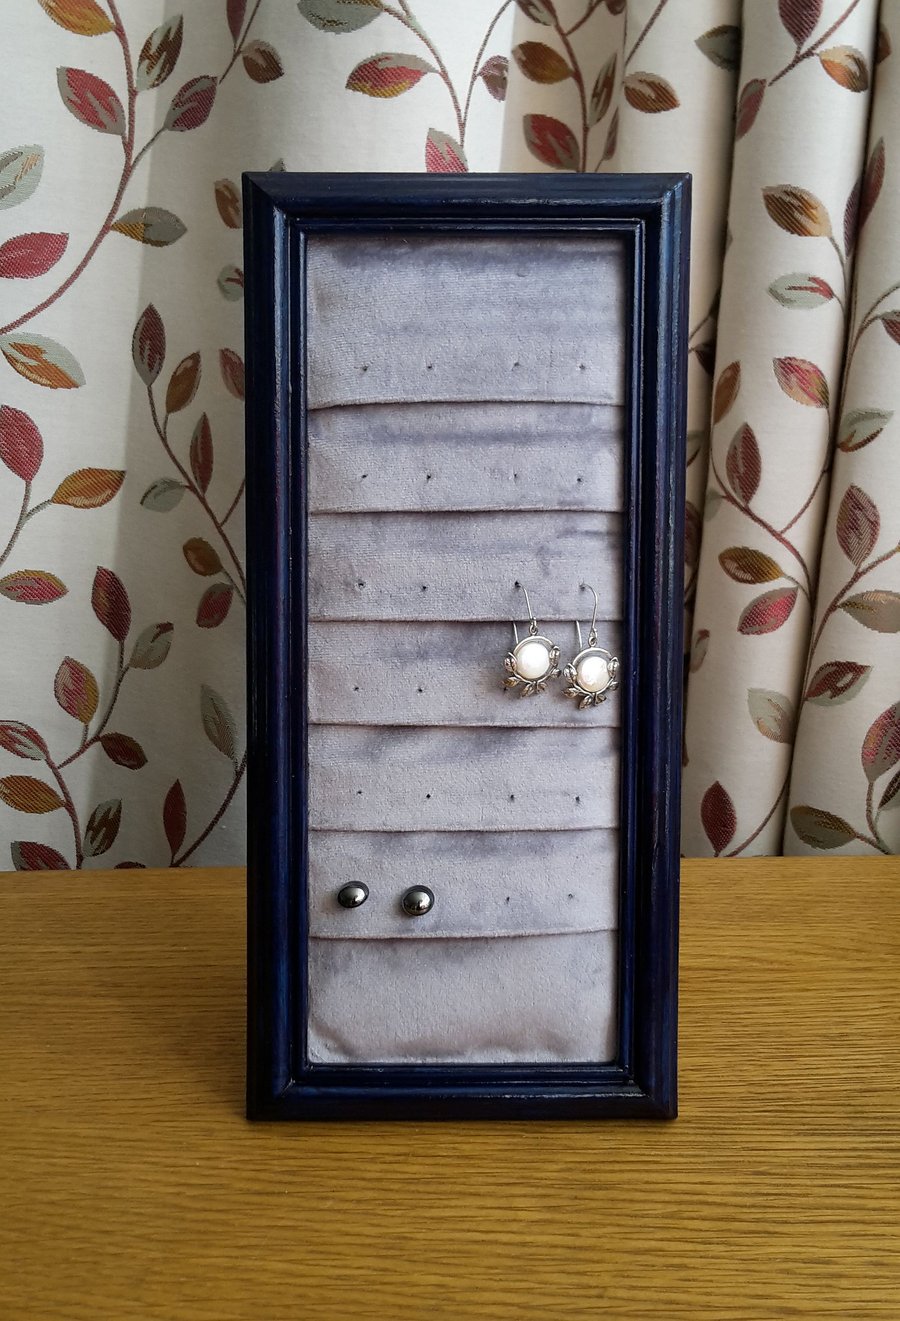 Upcycled picture frame earring holder, blue and silver-grey